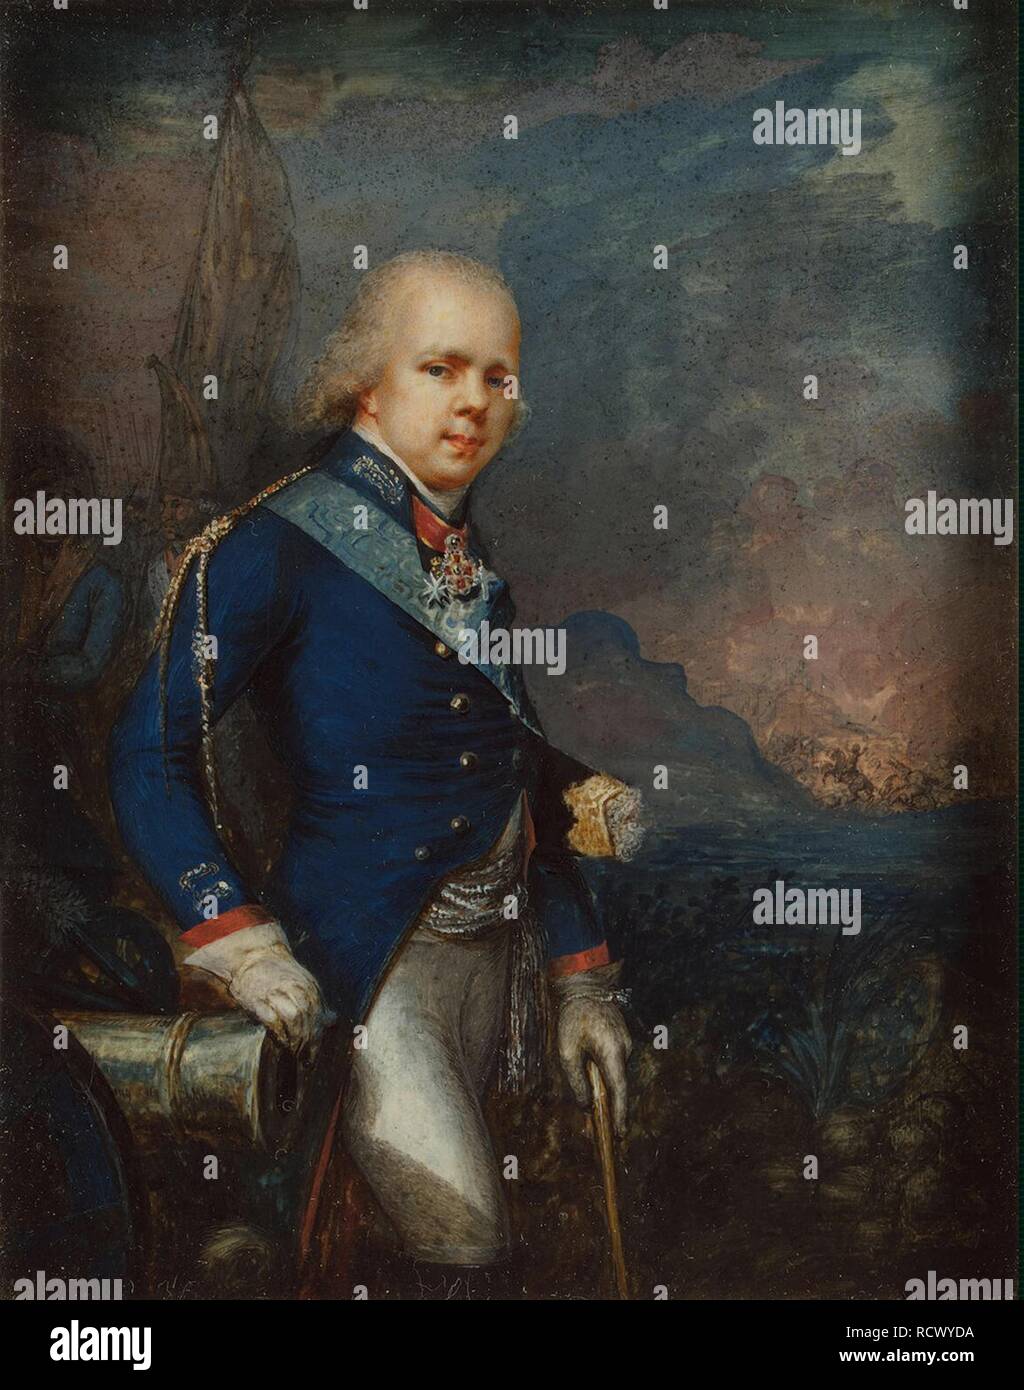 Portrait of Grand Duke Constantine Pavlovich of Russia (1779-1831) before the Battle of Novi. Museum: State Hermitage, St. Petersburg. Author: ANONYMOUS. Stock Photo